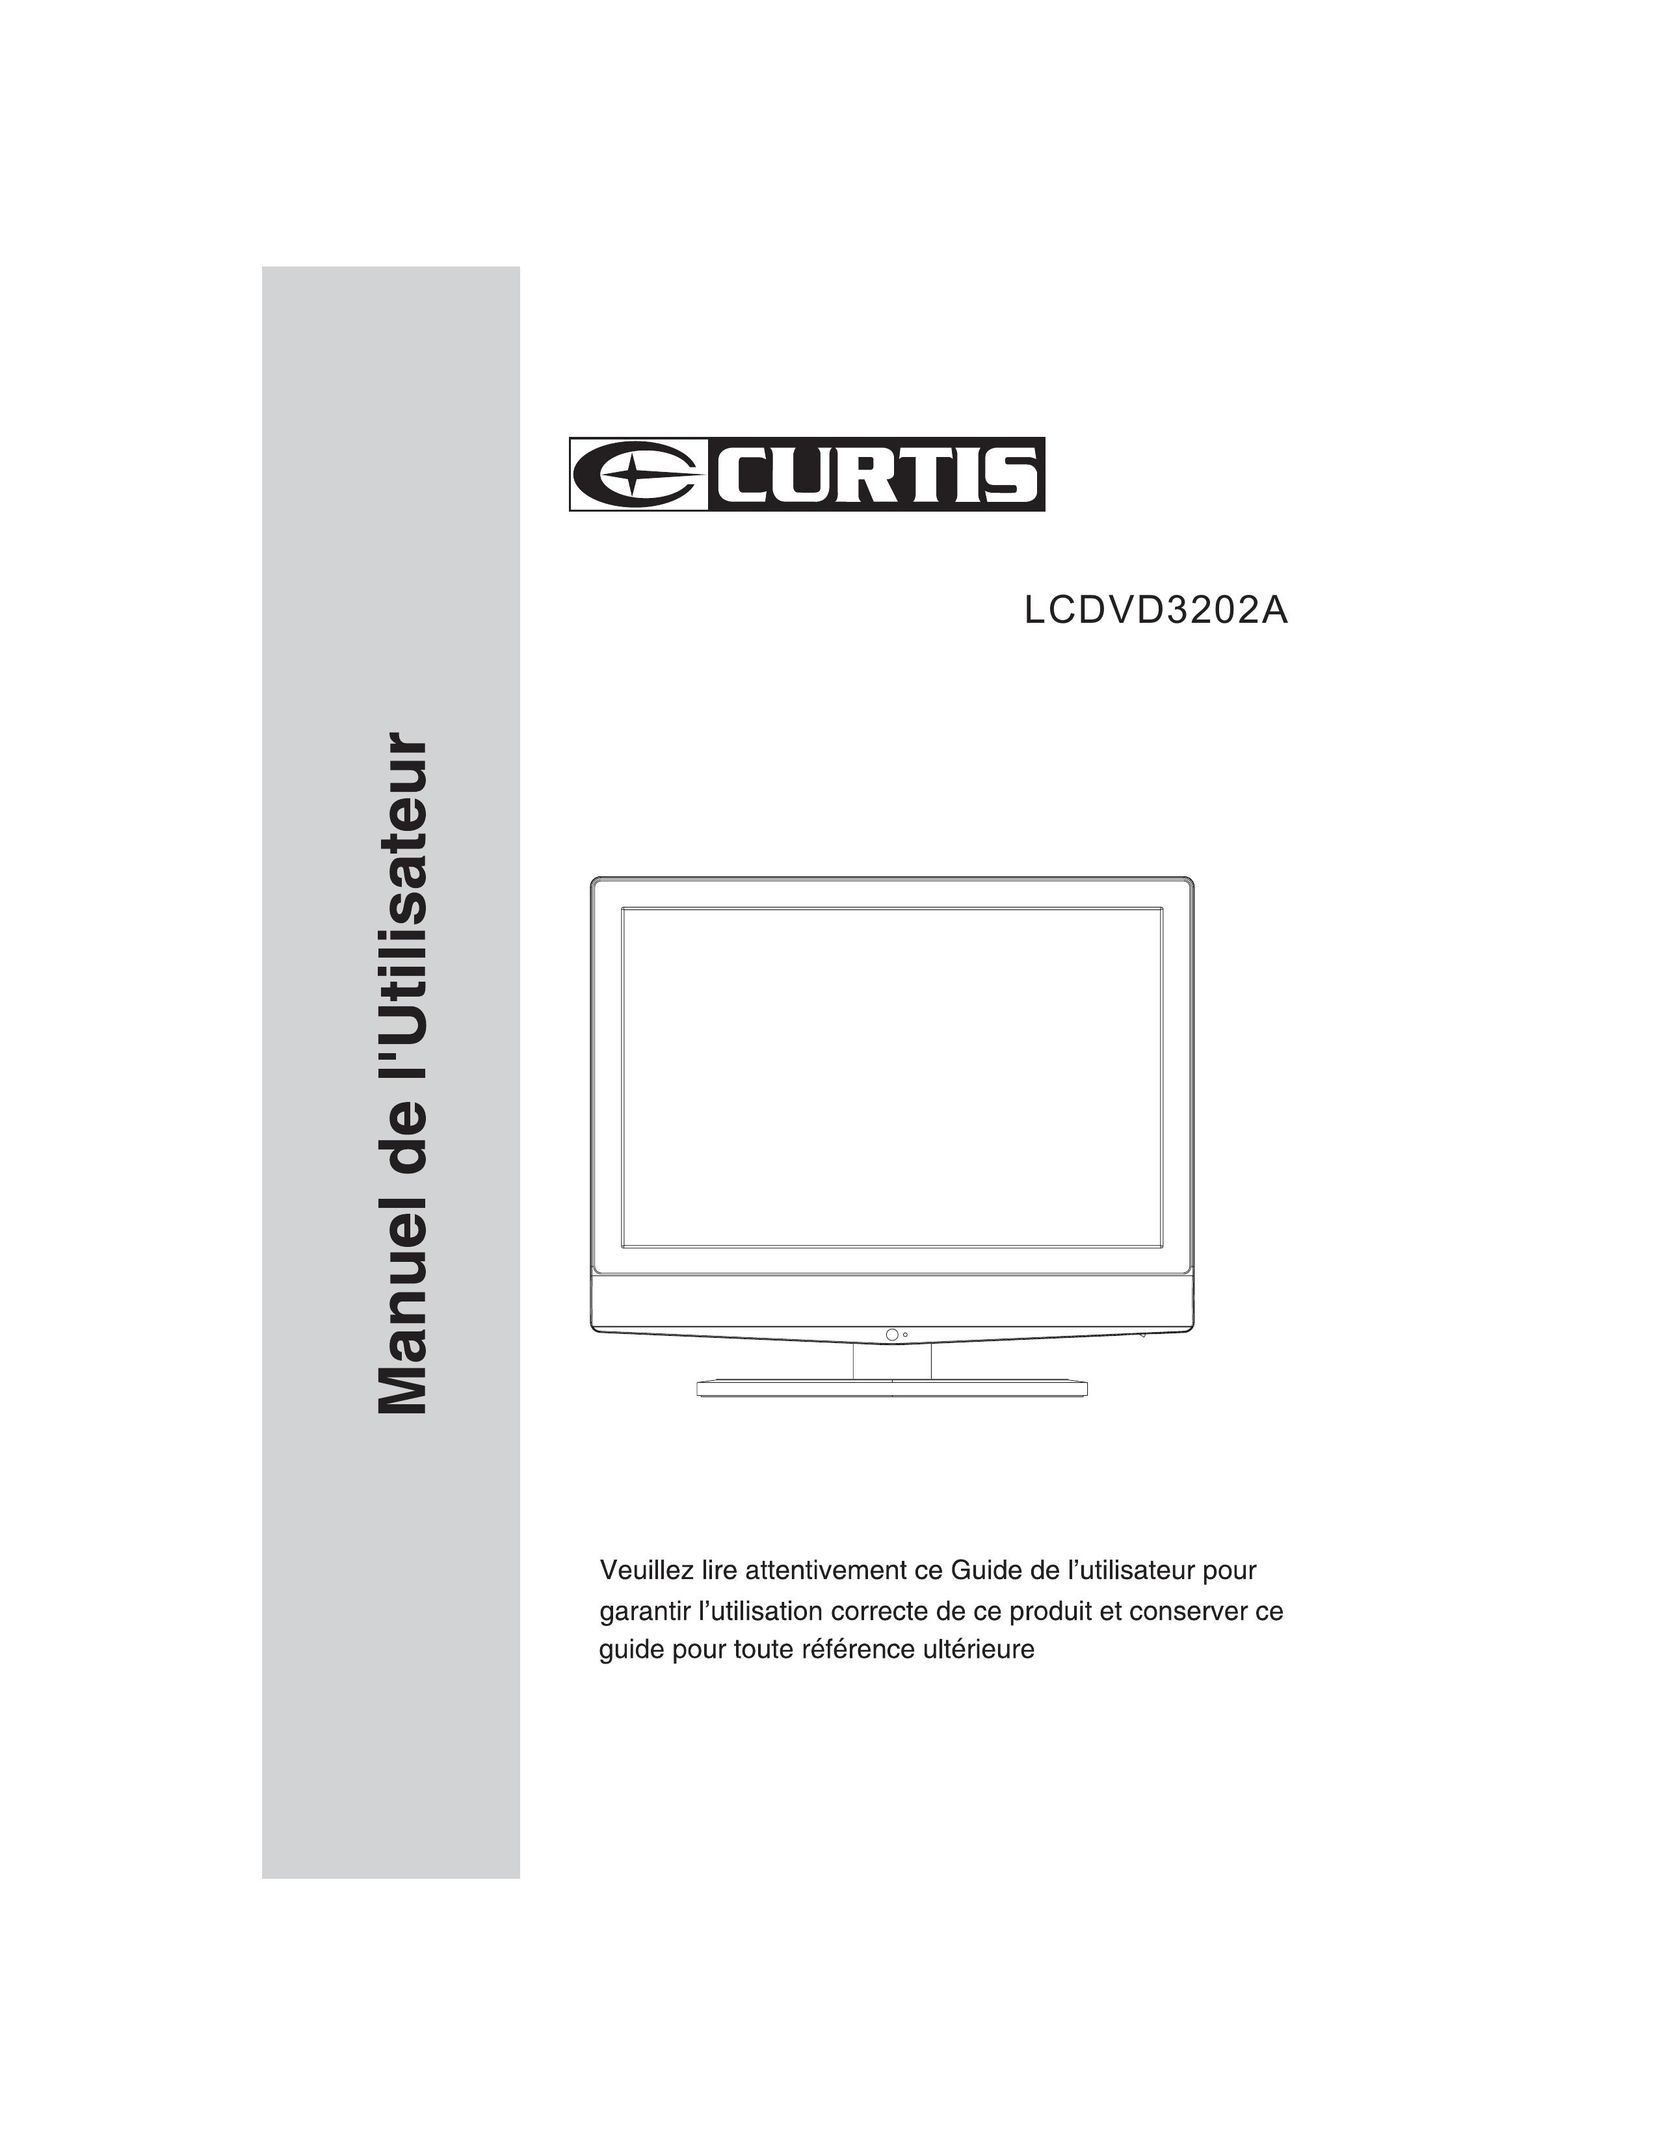 Curtis LCDVD3202A Flat Panel Television User Manual